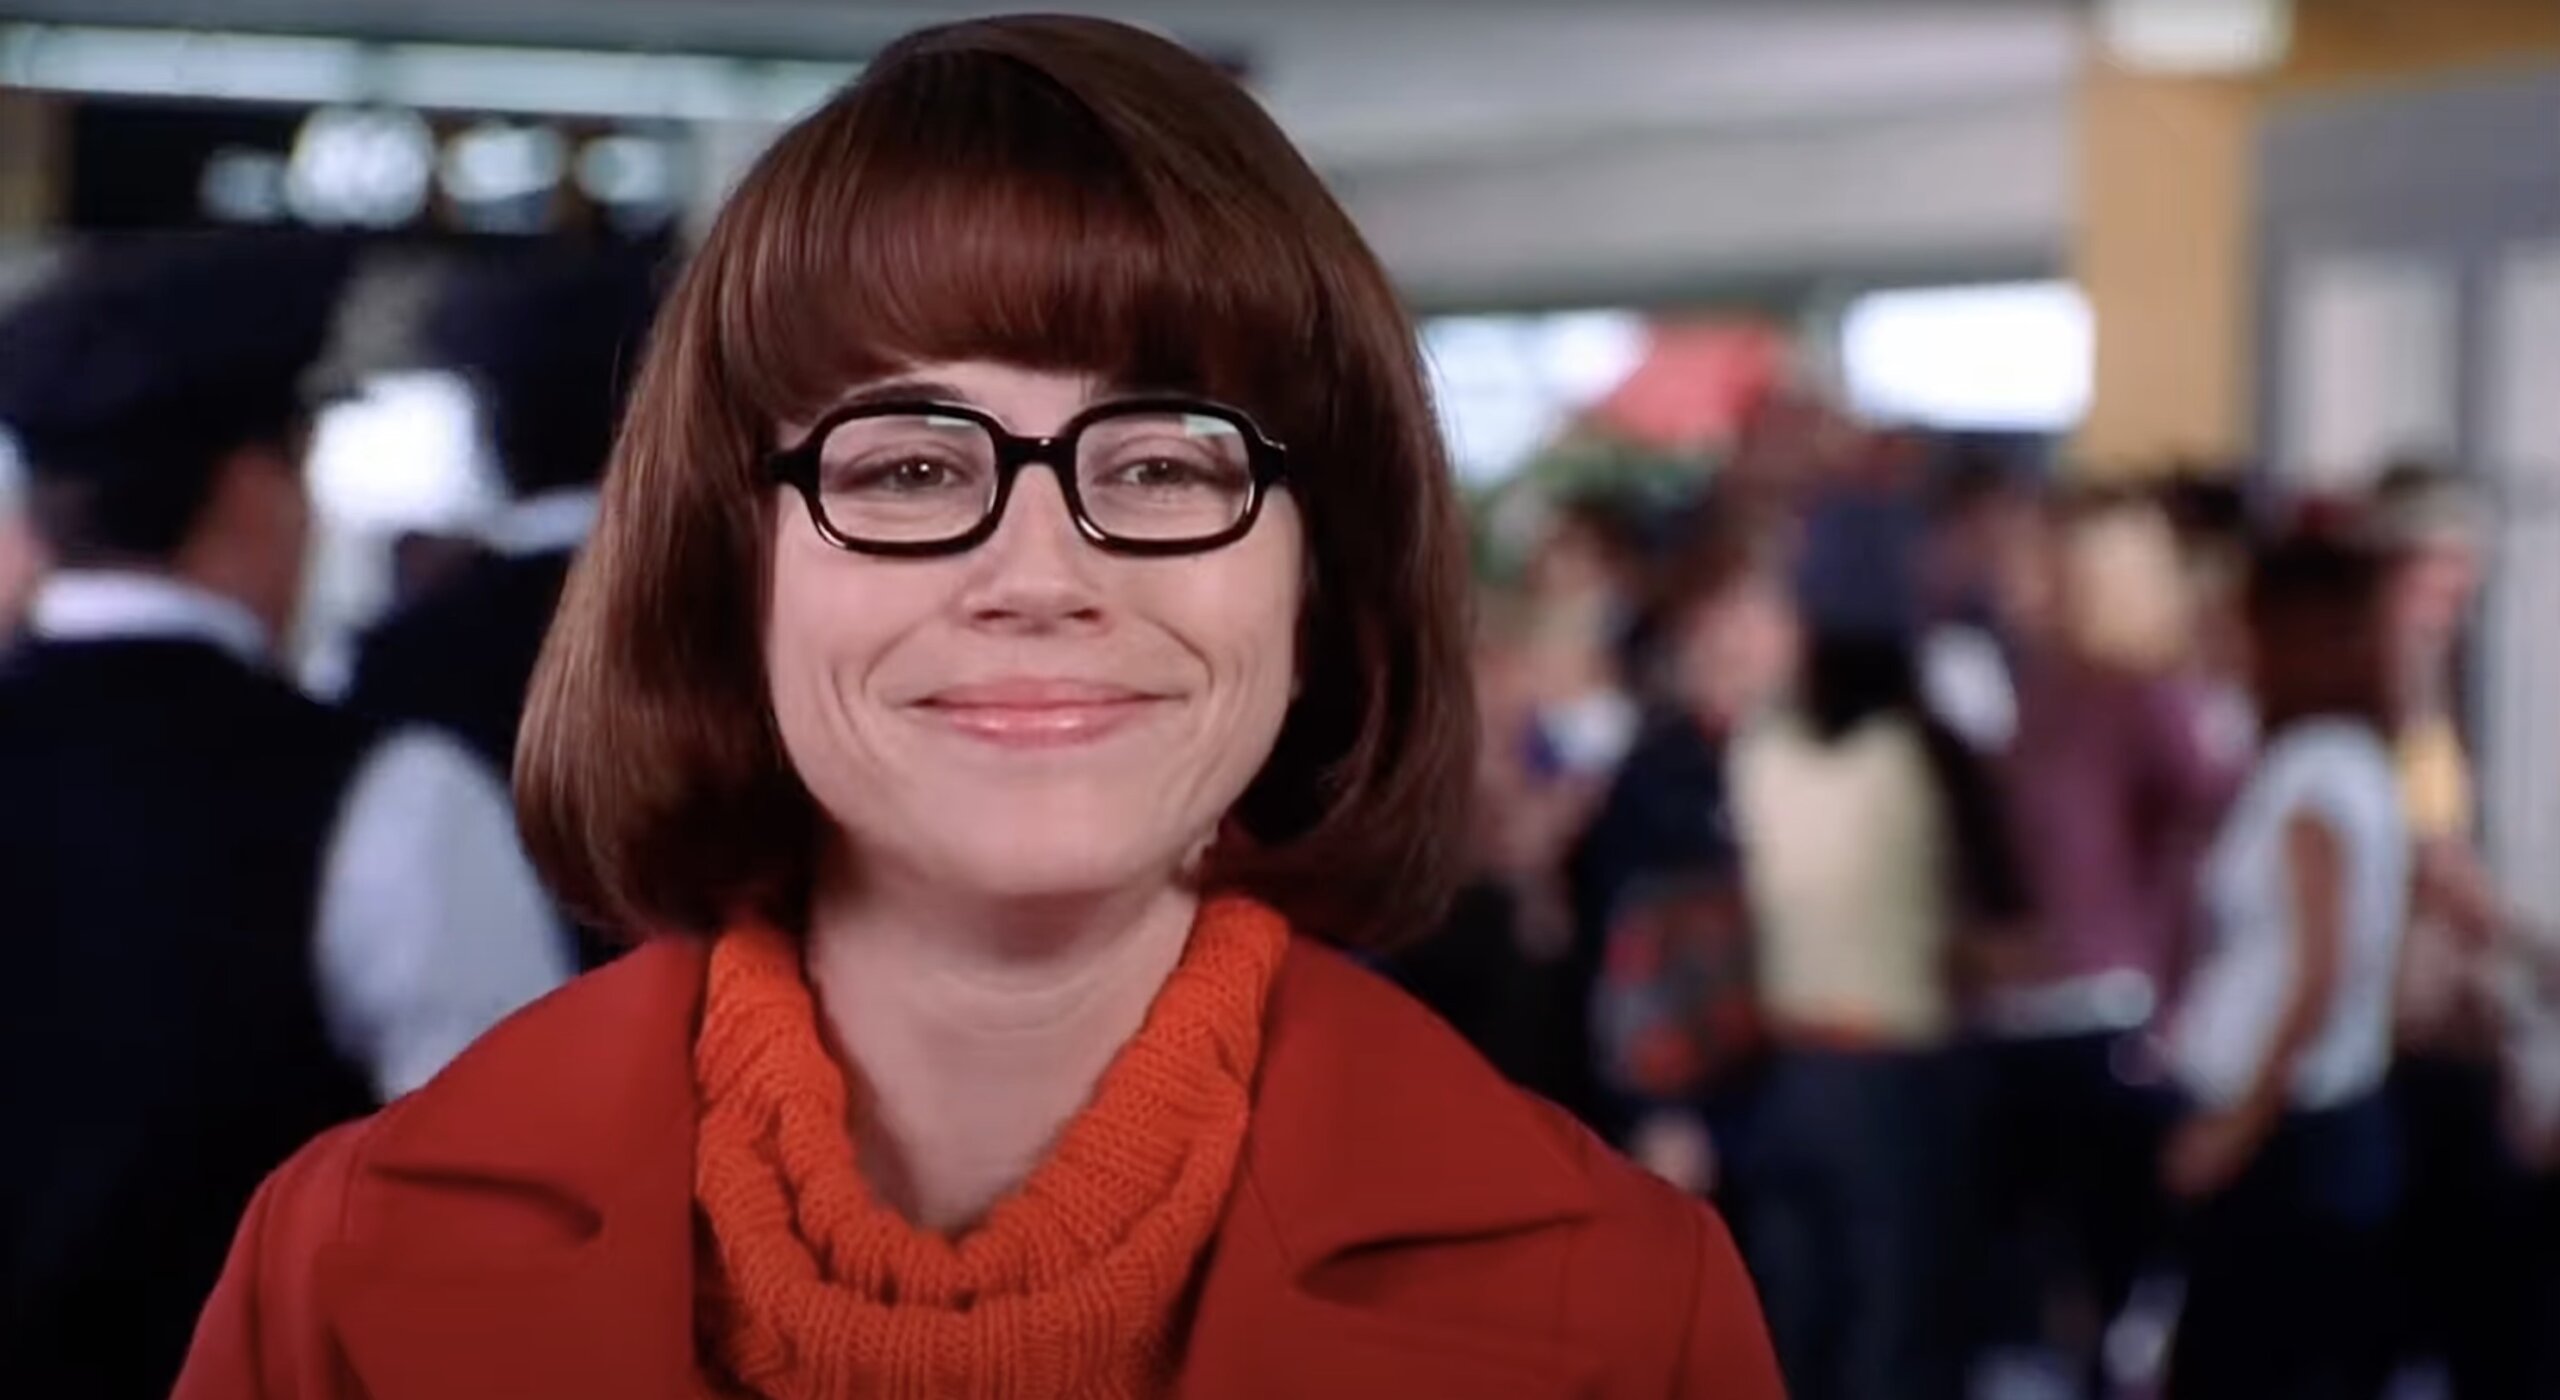 Gender Bender Scooby Doo Lesbian Porn - Twenty years after the live-action 'Scooby-Doo' film, Velma's finally out |  Xtra Magazine